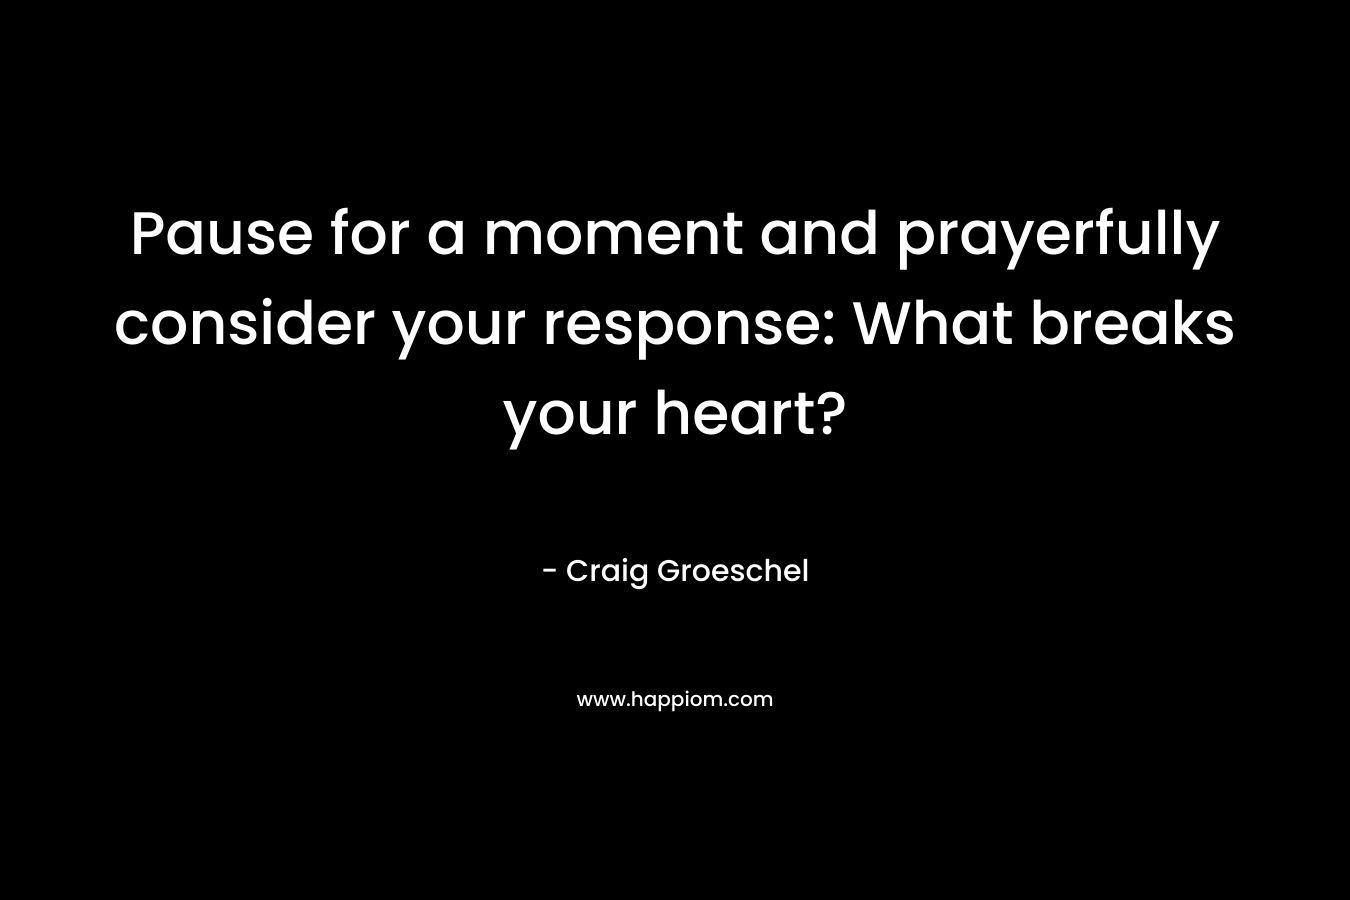 Pause for a moment and prayerfully consider your response: What breaks your heart?